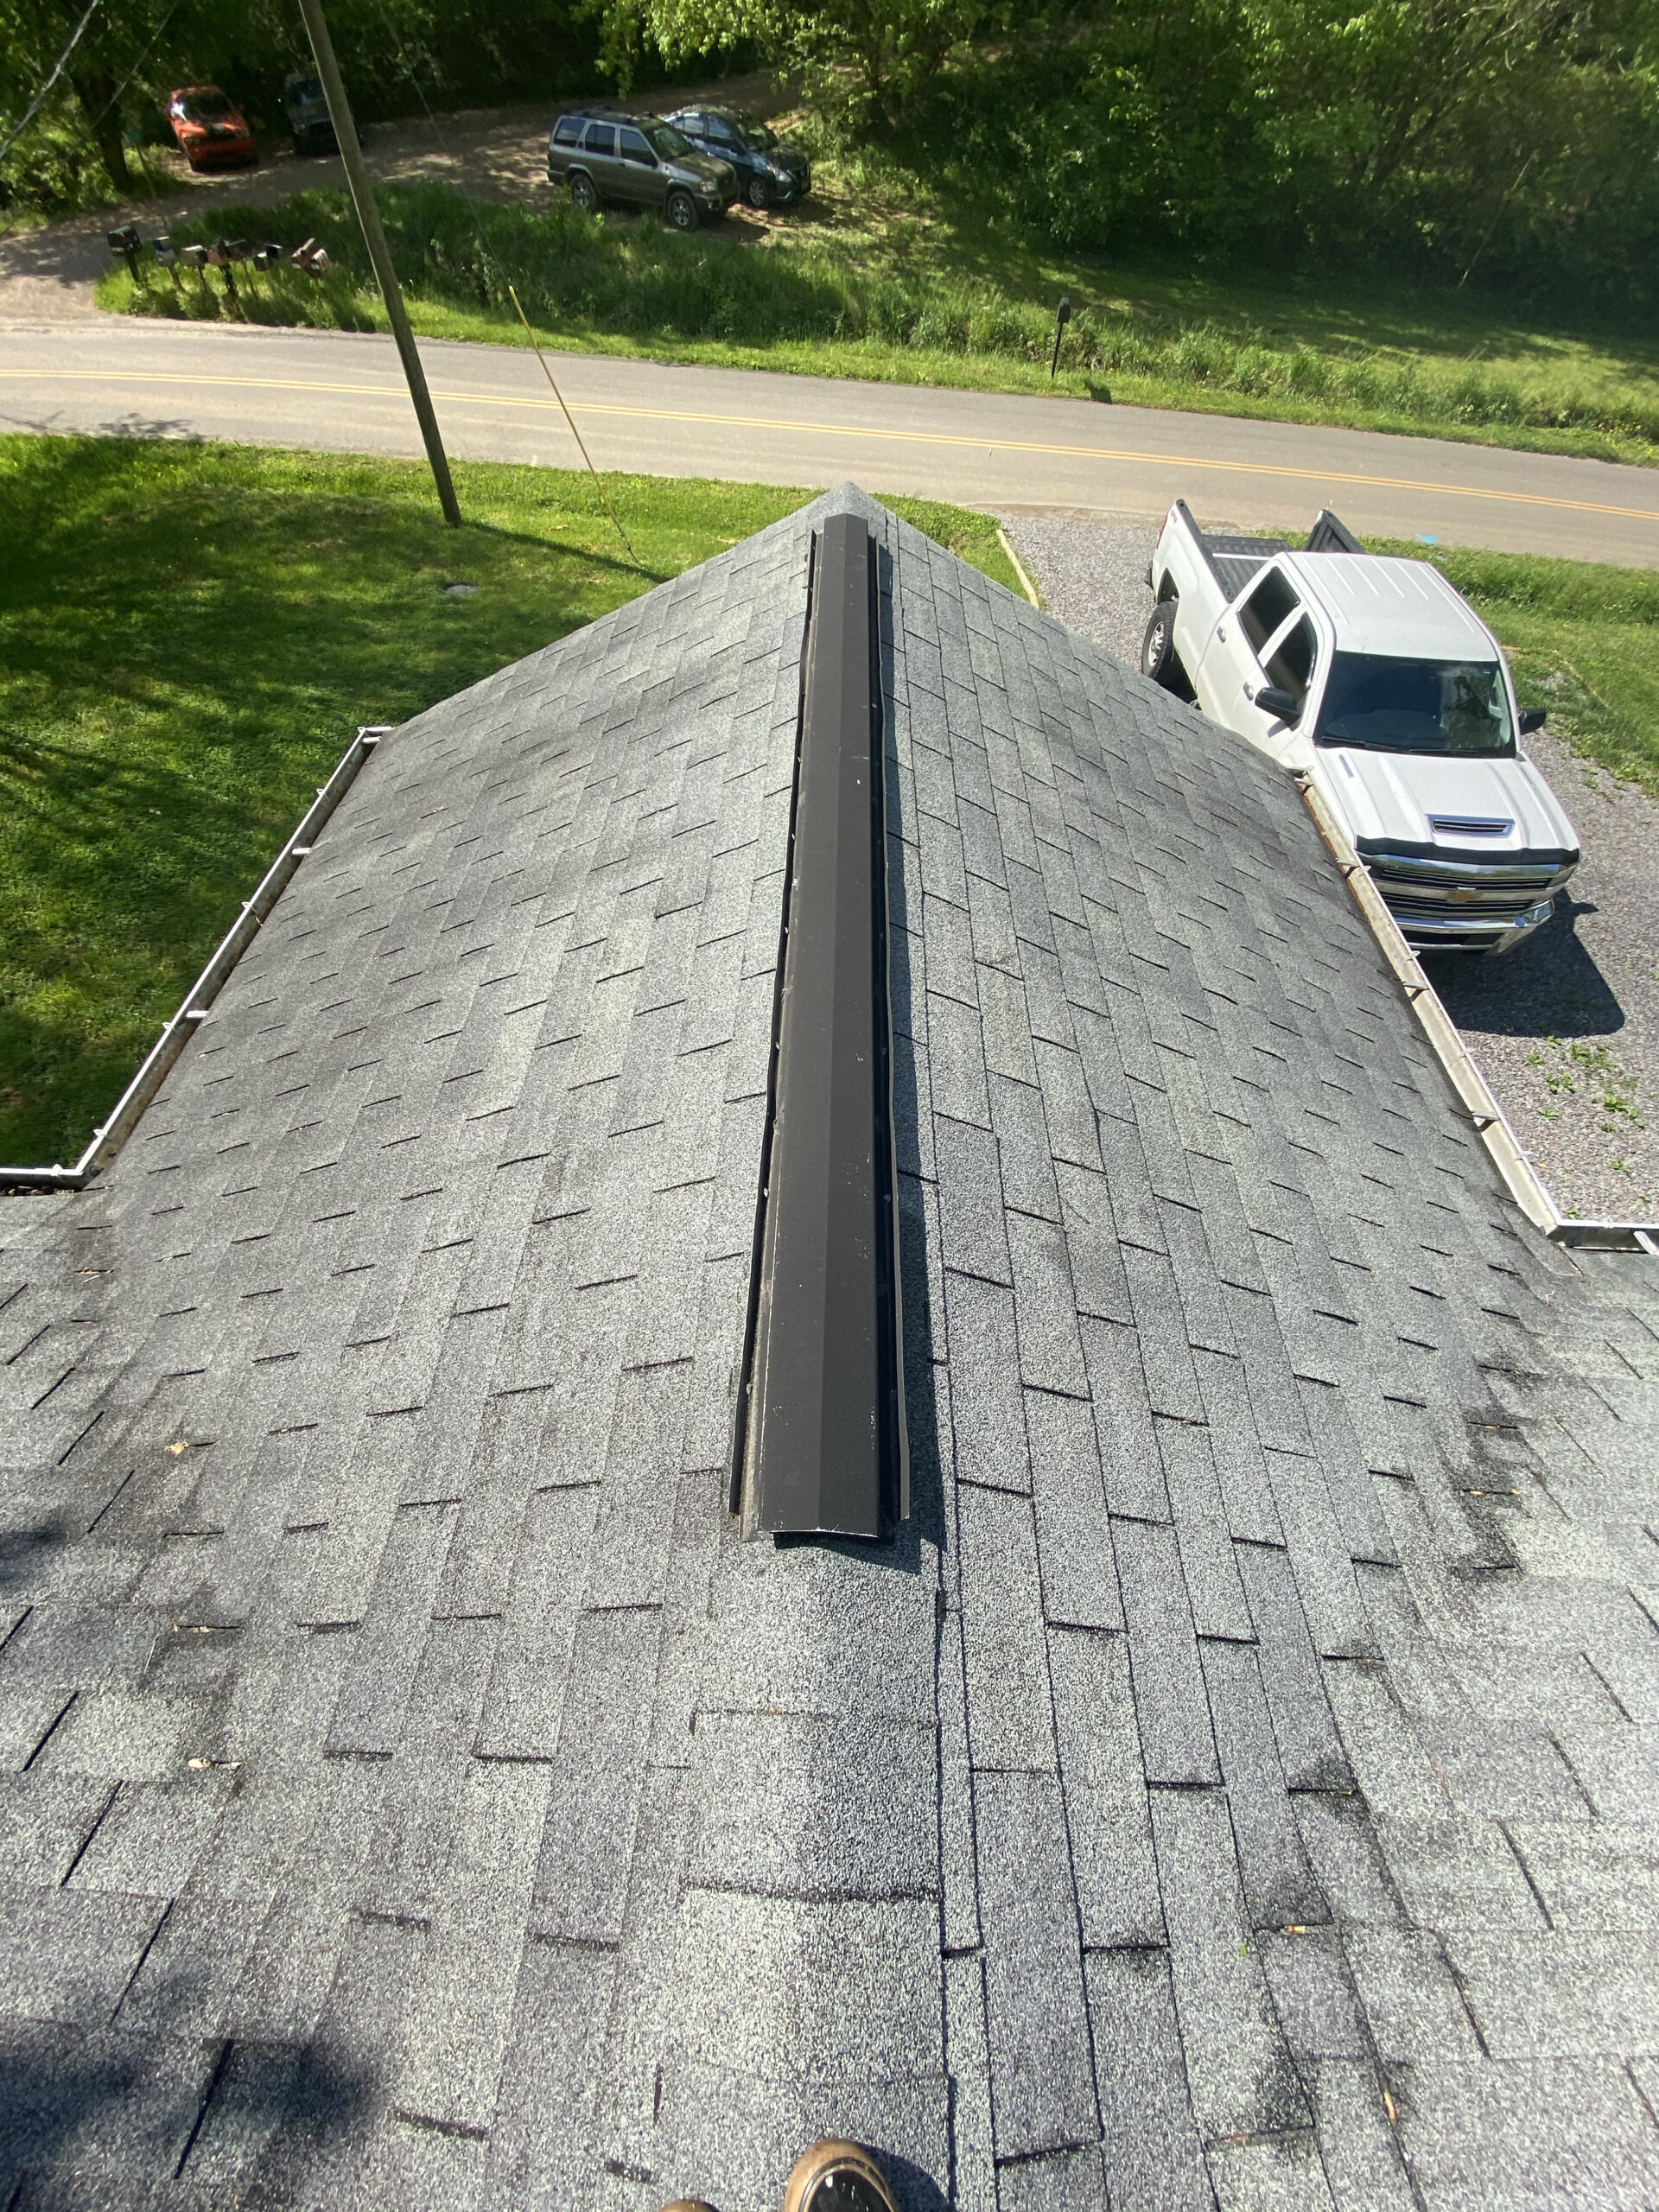 This is a picture of and old metal ridge vent on a three tab roof